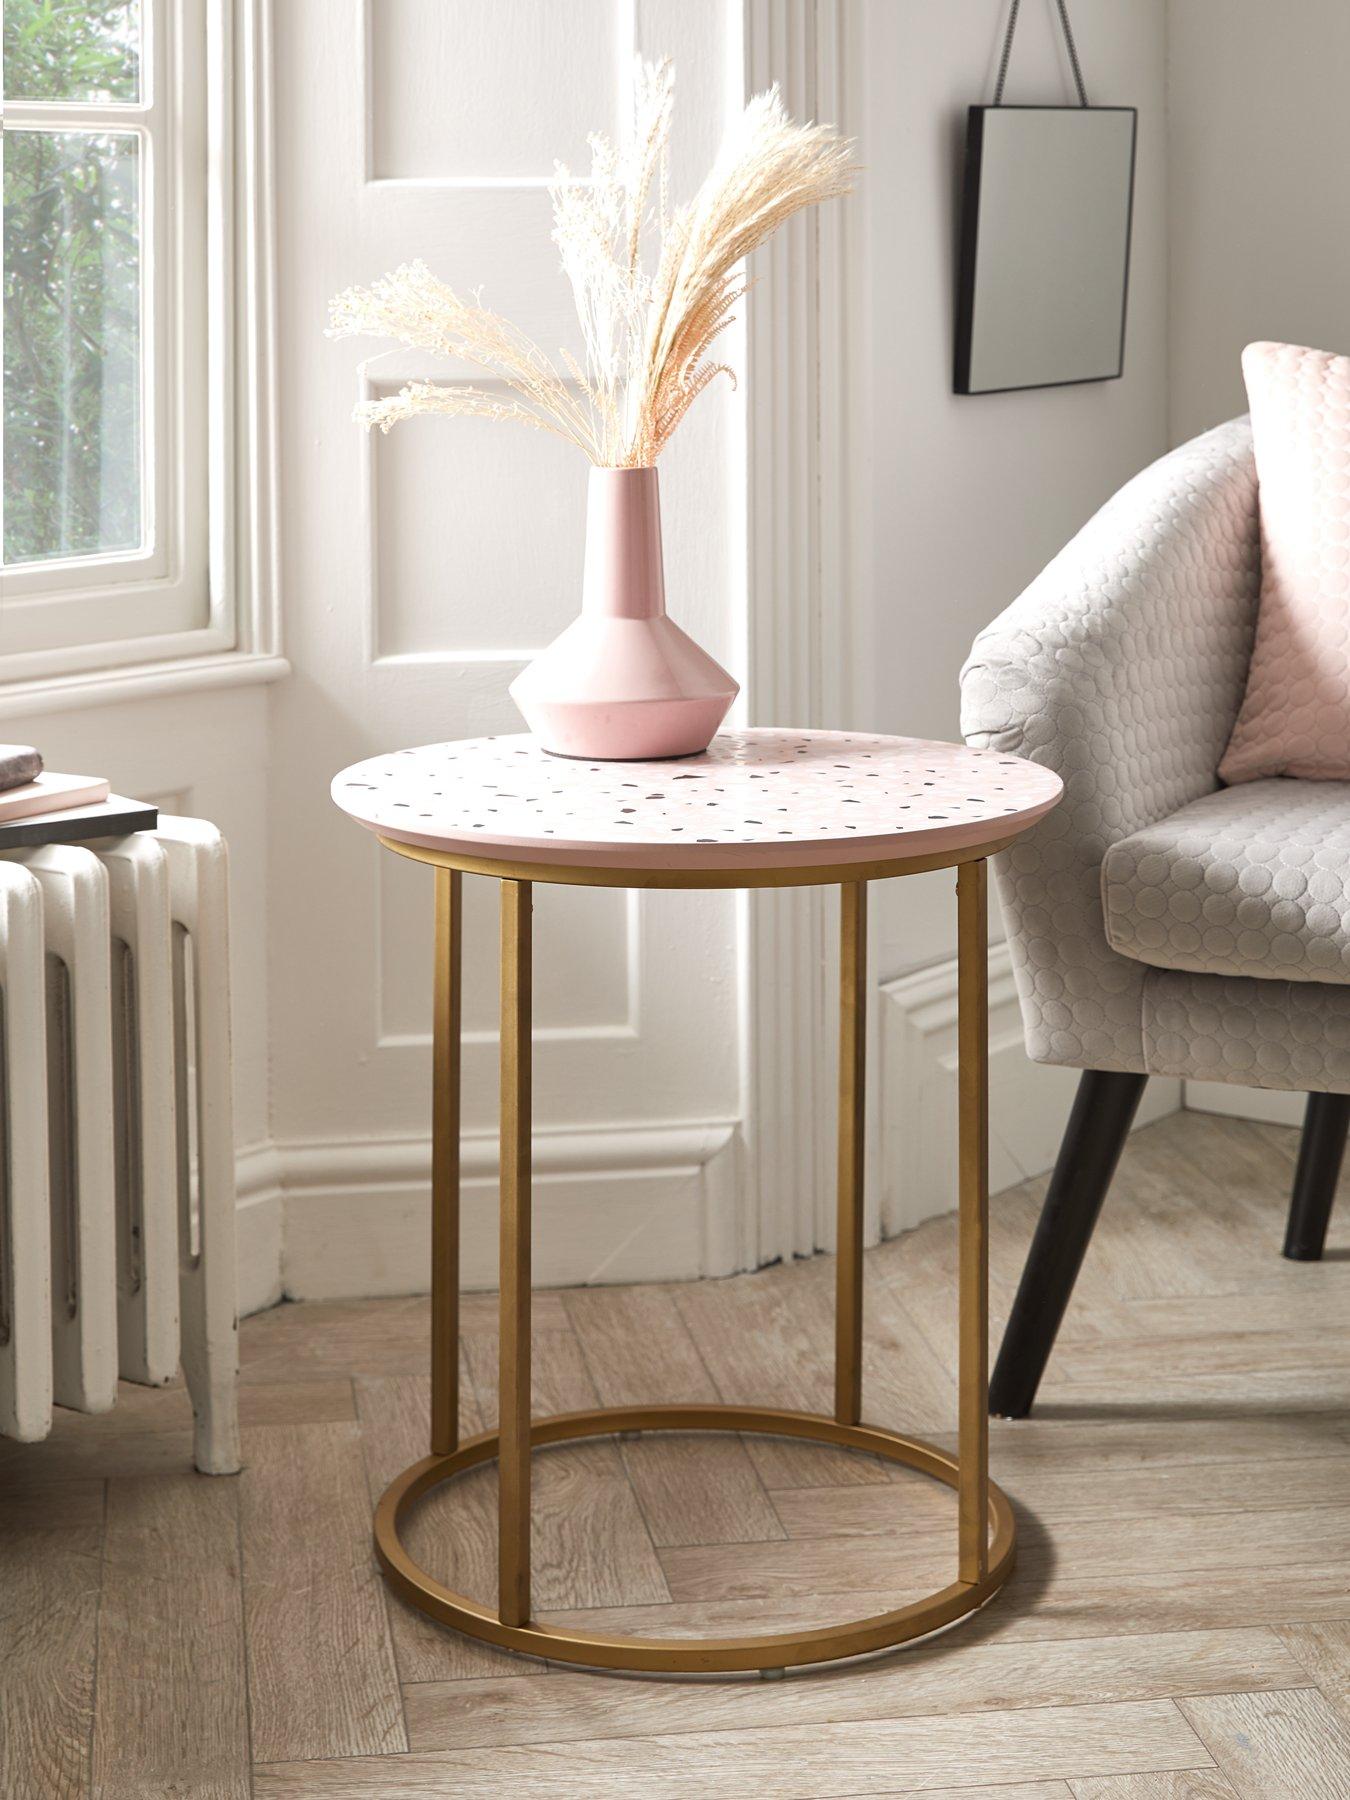 FineBuy Side Table Gold Metal 30 x 49.5 x 30 cm End table Living Room Round Hammered Storage table Oriental-Style Designer Coffee table Sofa table Small Lounge table 